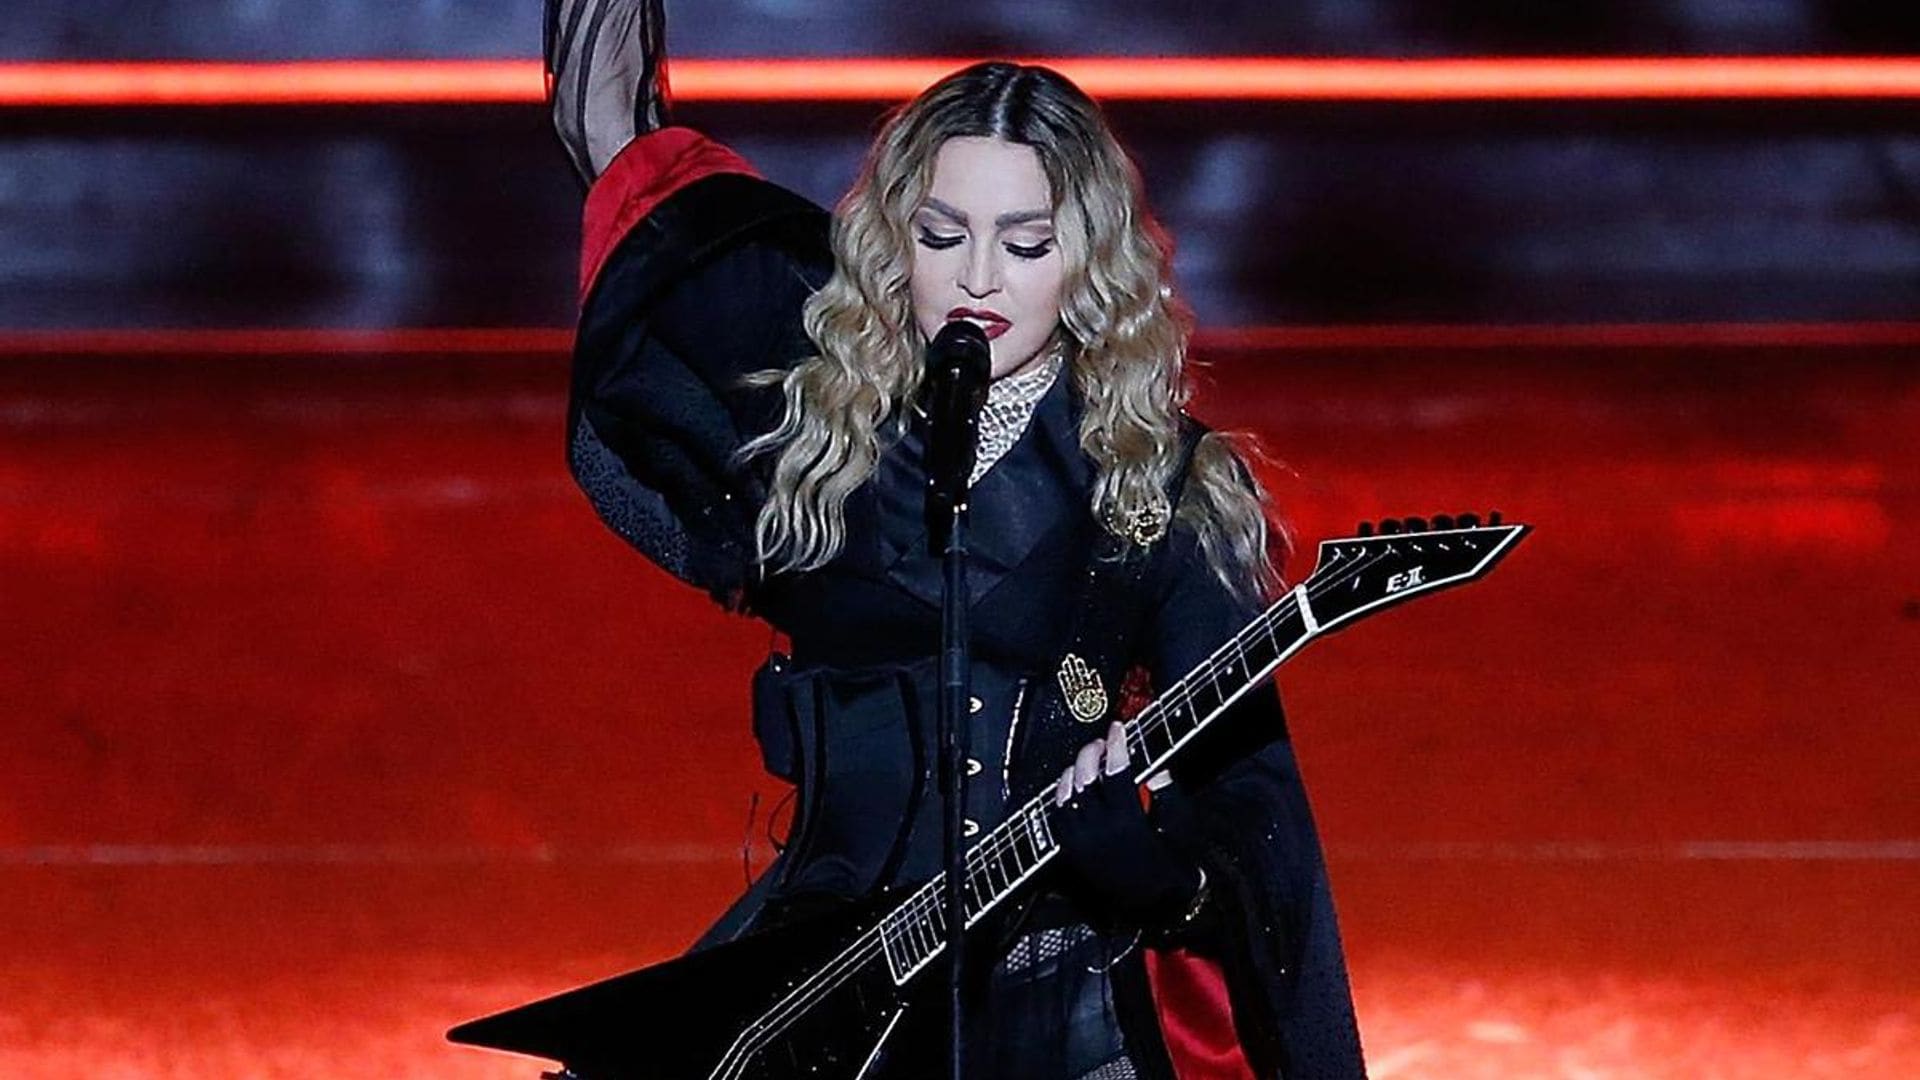 The grueling rehearsal schedule that led Madonna to ICU